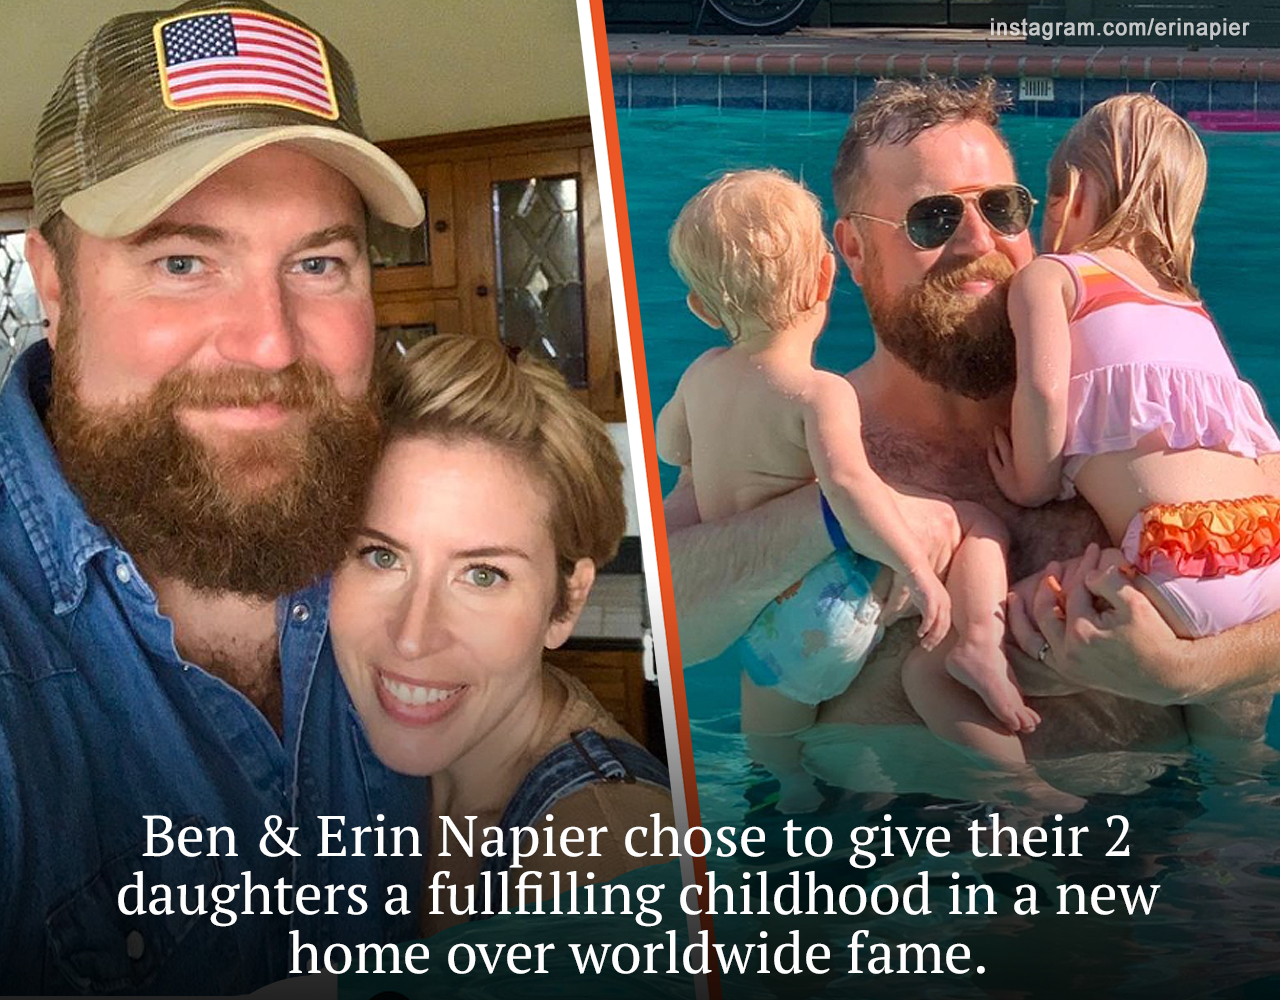 HGTV’s Ben and Erin Napier, who are celebrating their 14th wedding anniversary and the 18th anniversary of their first meeting, confessed what is most important to them in life – their precious children Helen, 5, and Mae, who’s nearly 2.